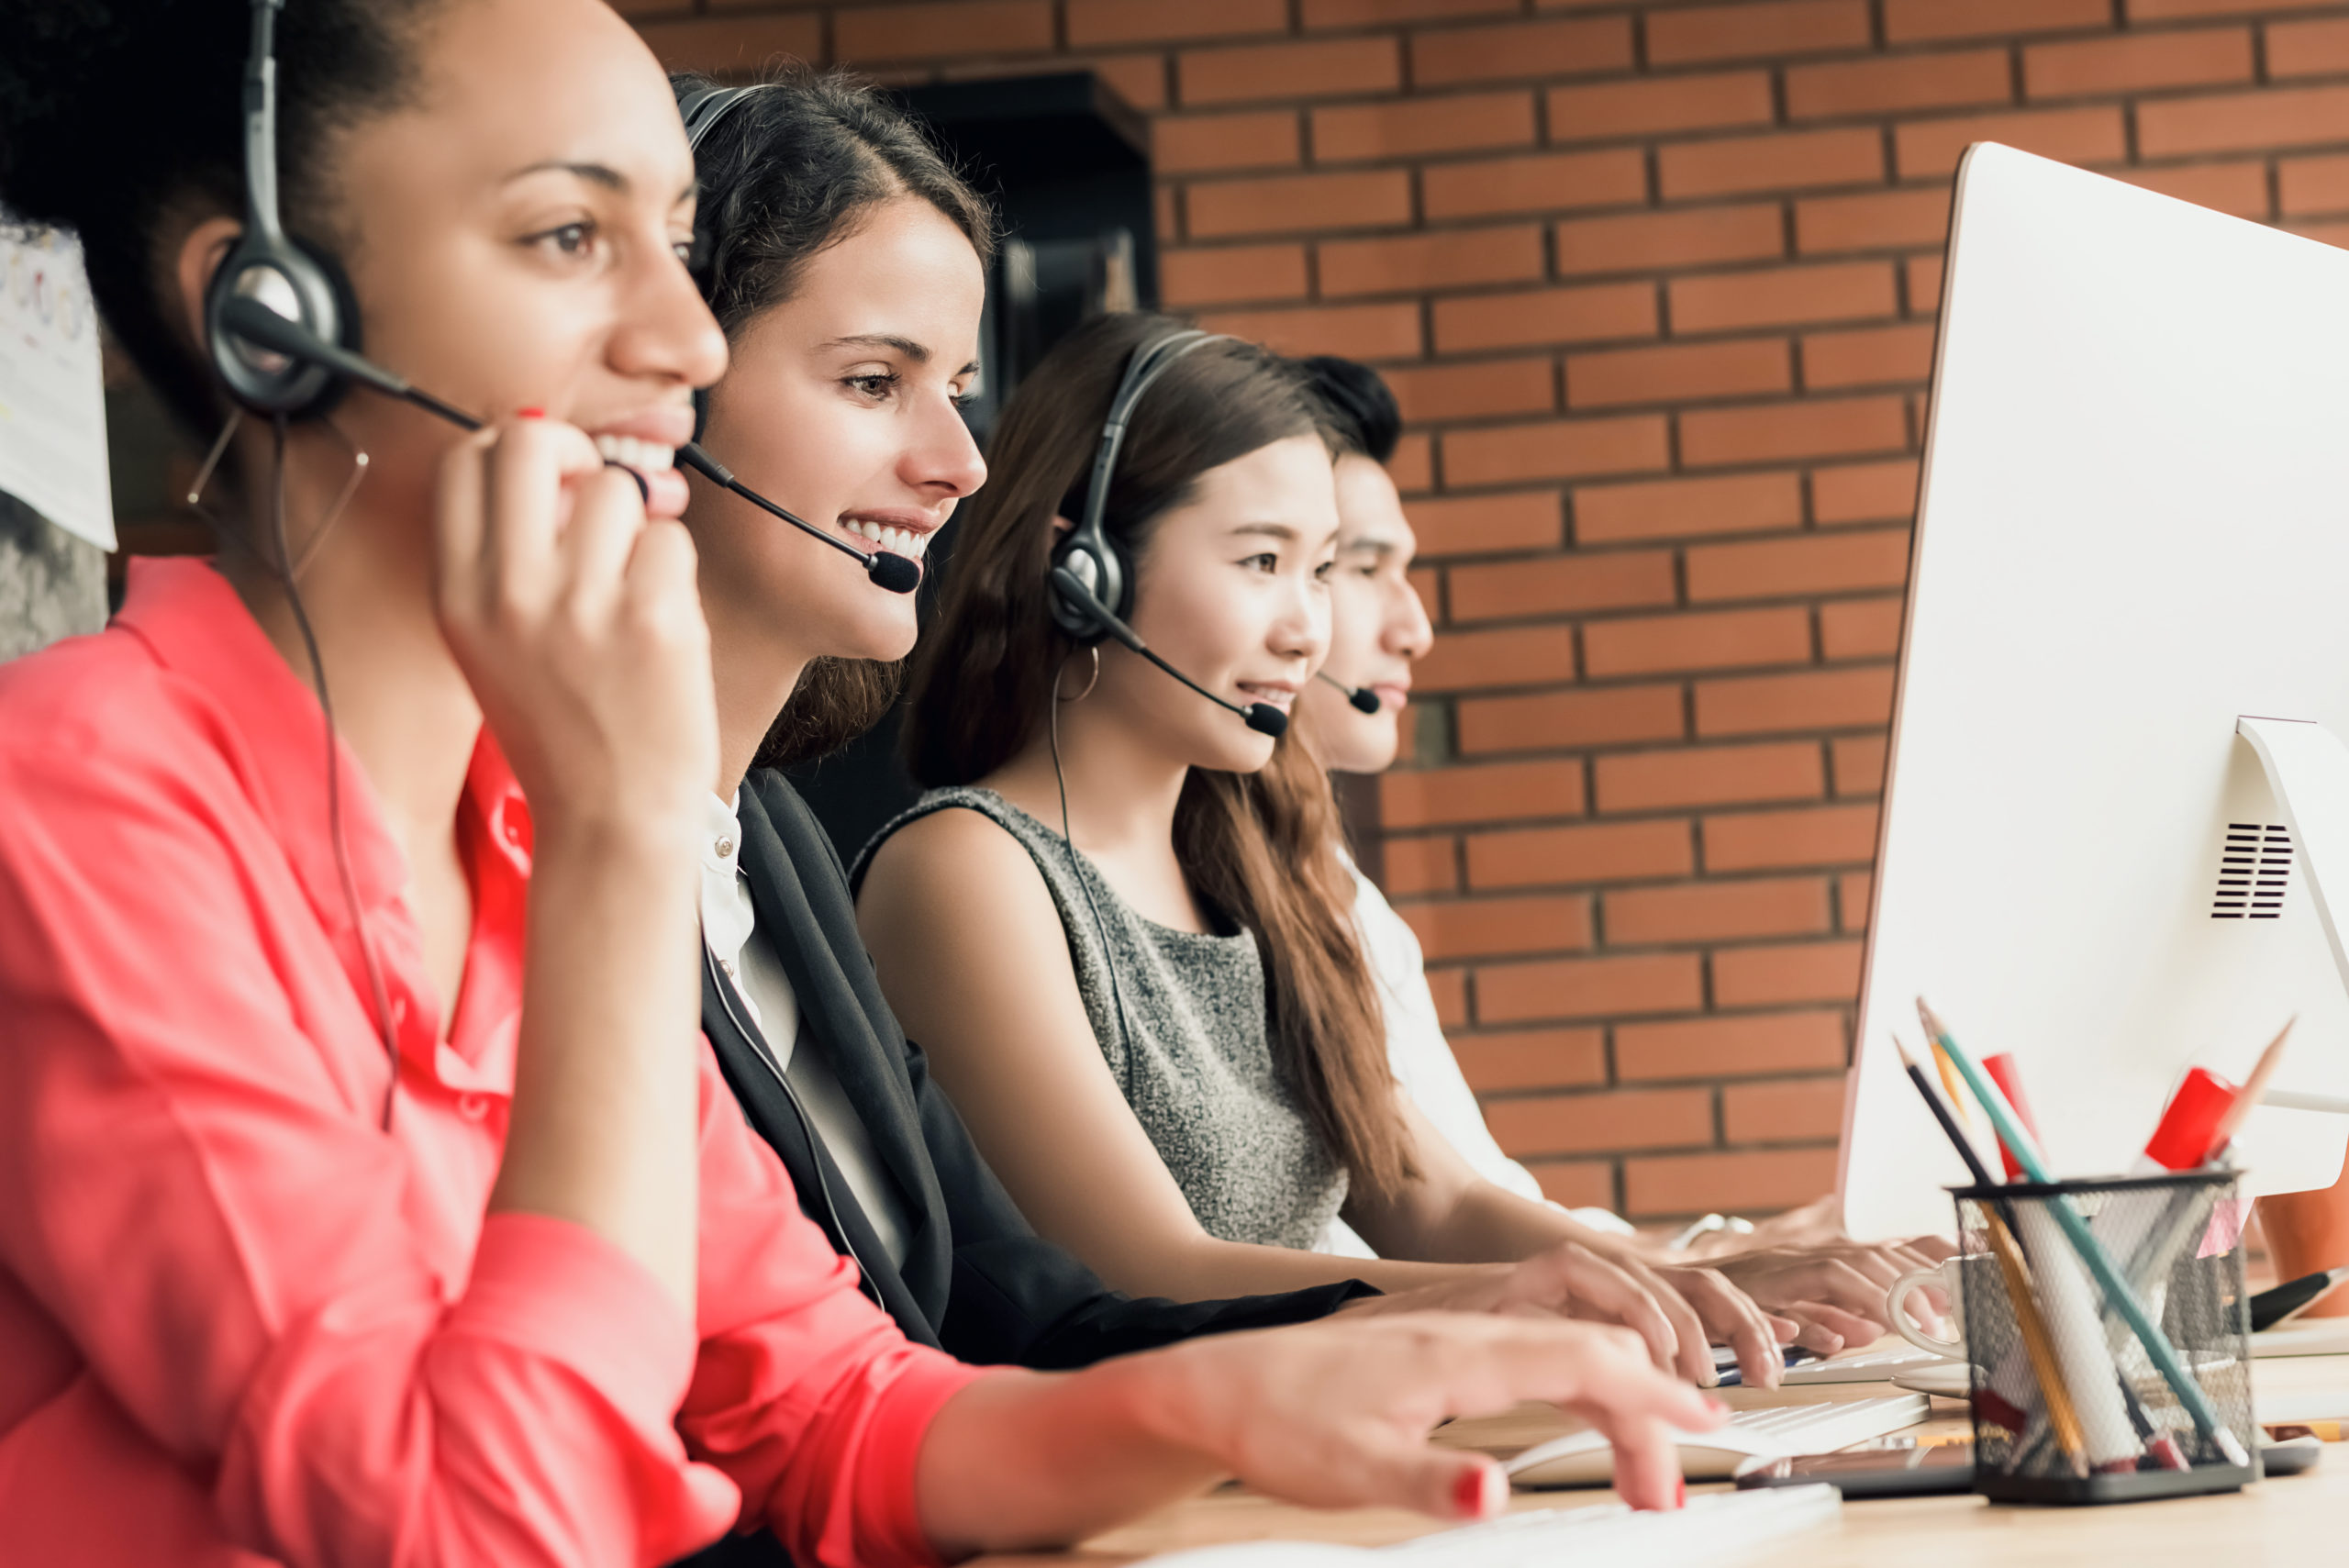 5 Power Scripts for Inexperienced Contact Center Agents